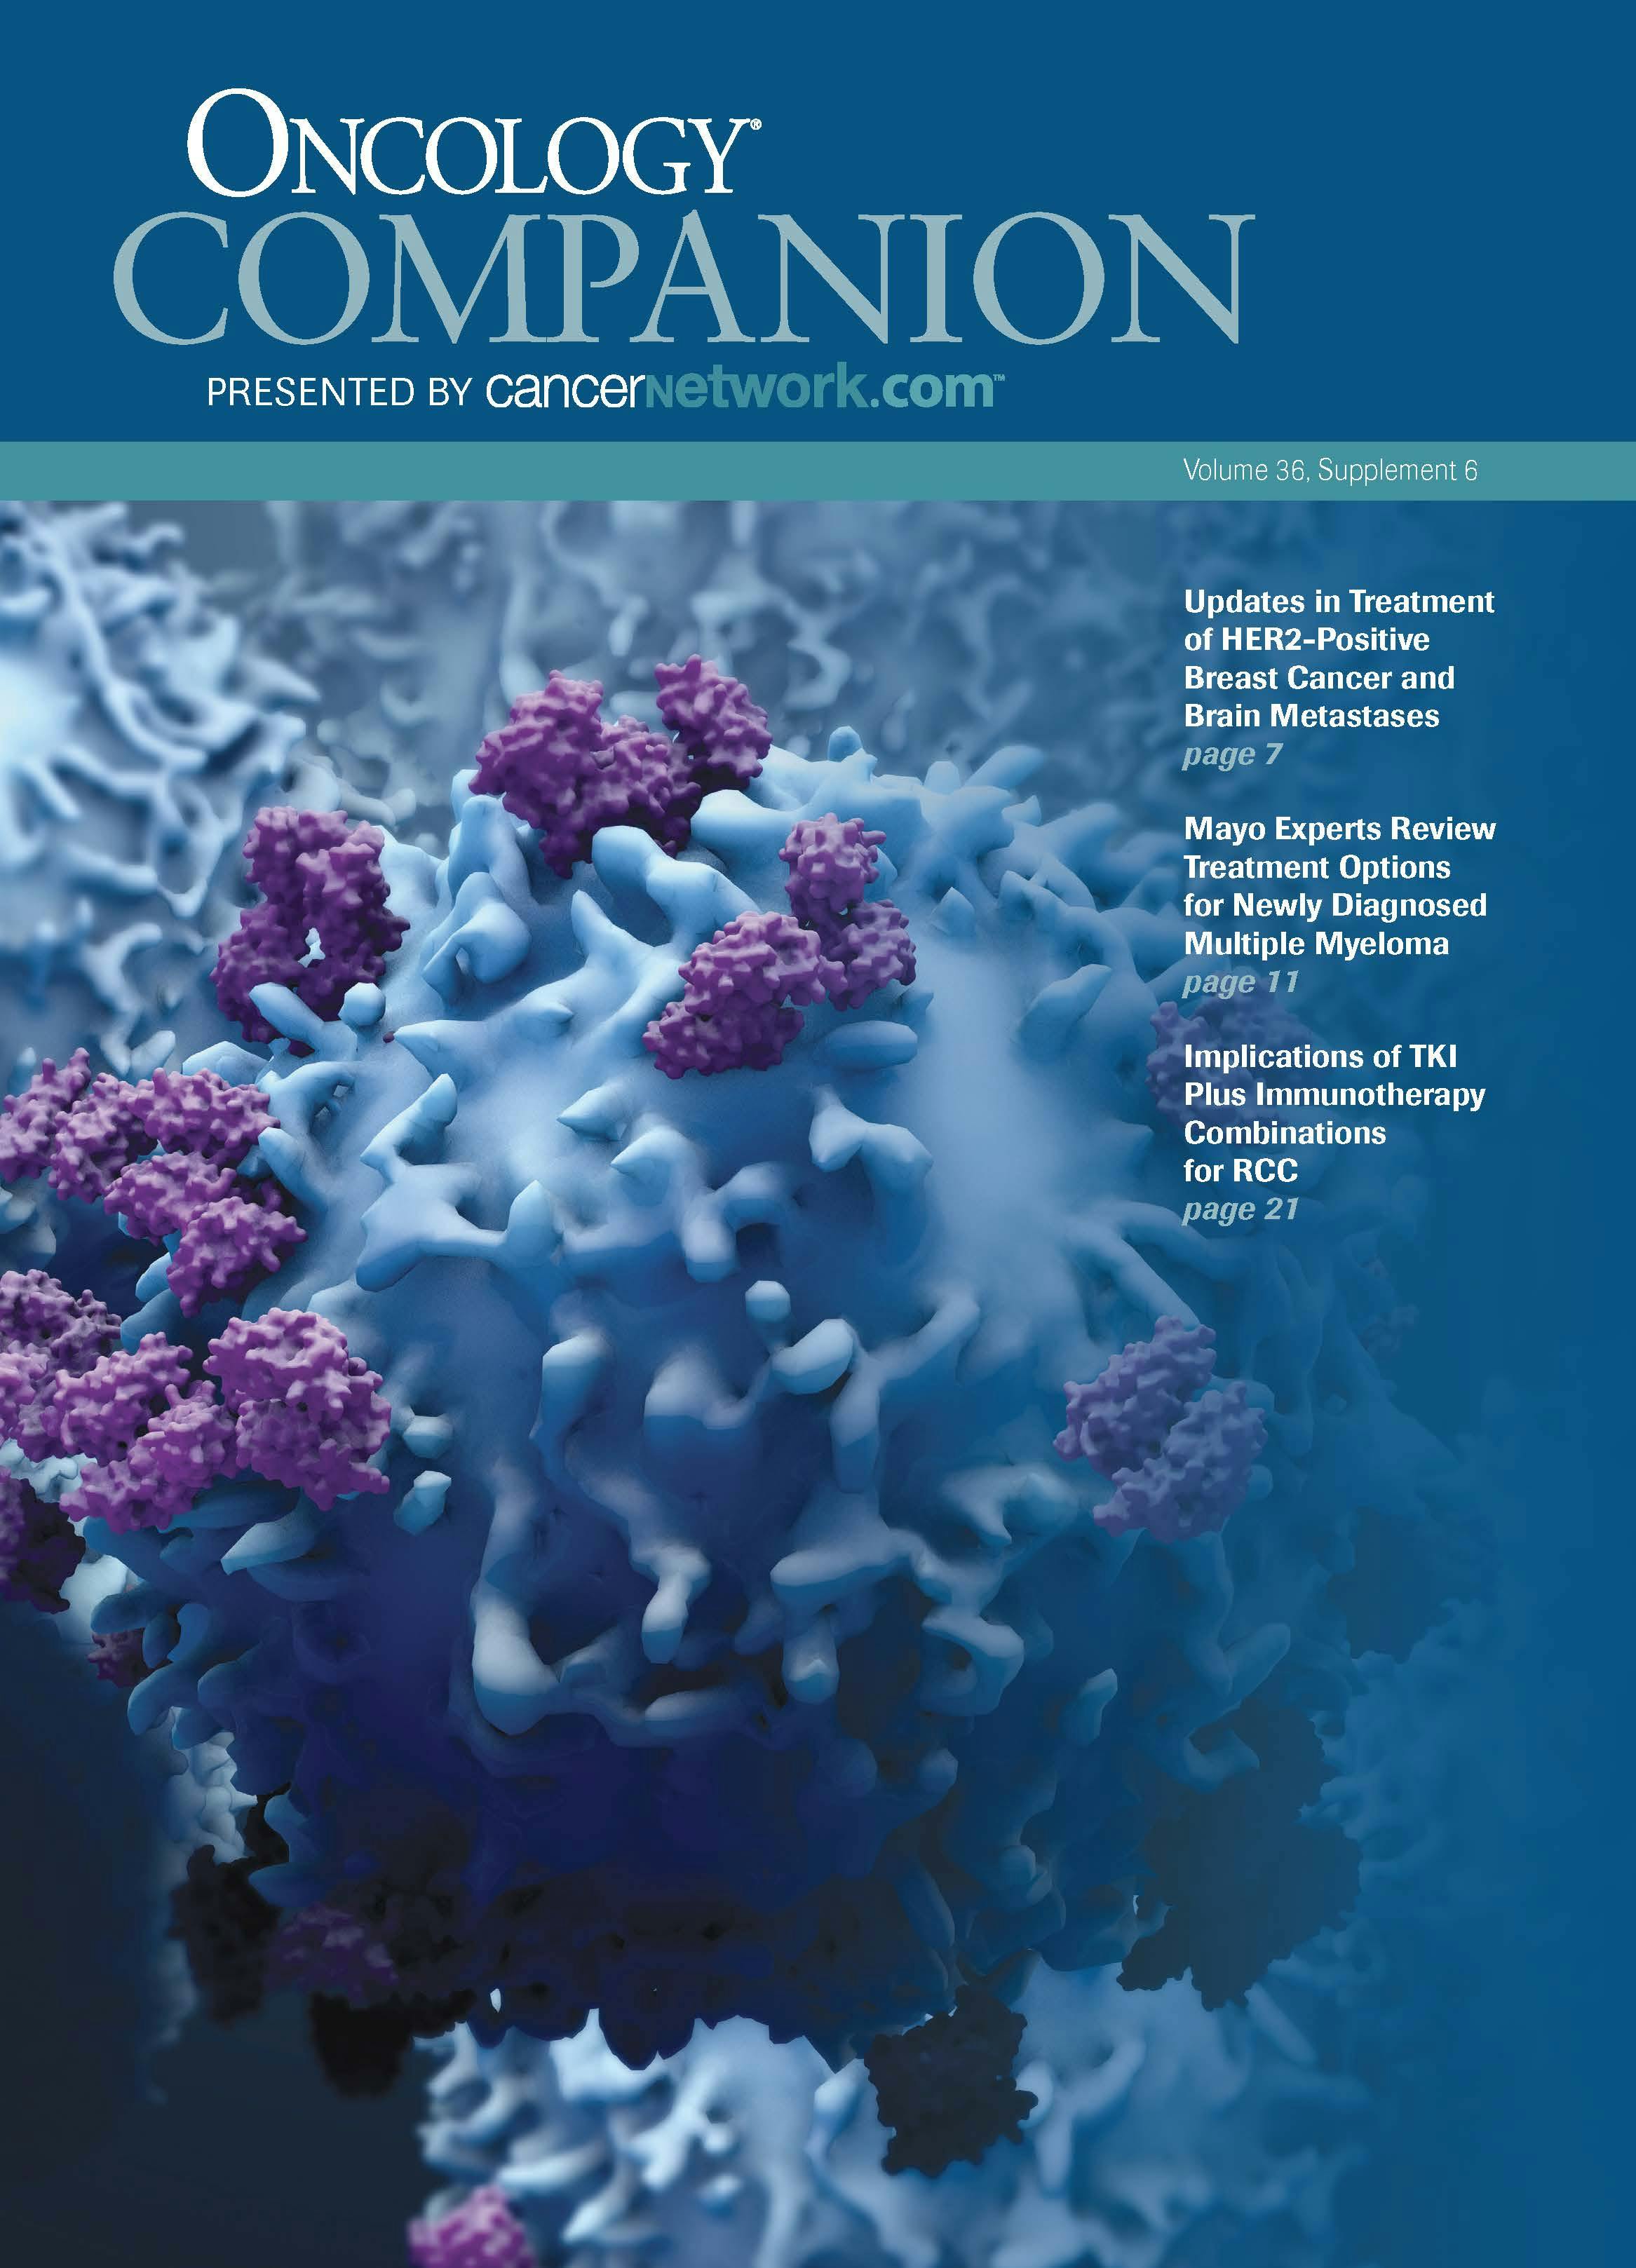 ONCOLOGY® Companion, Volume 36, Supplement 6